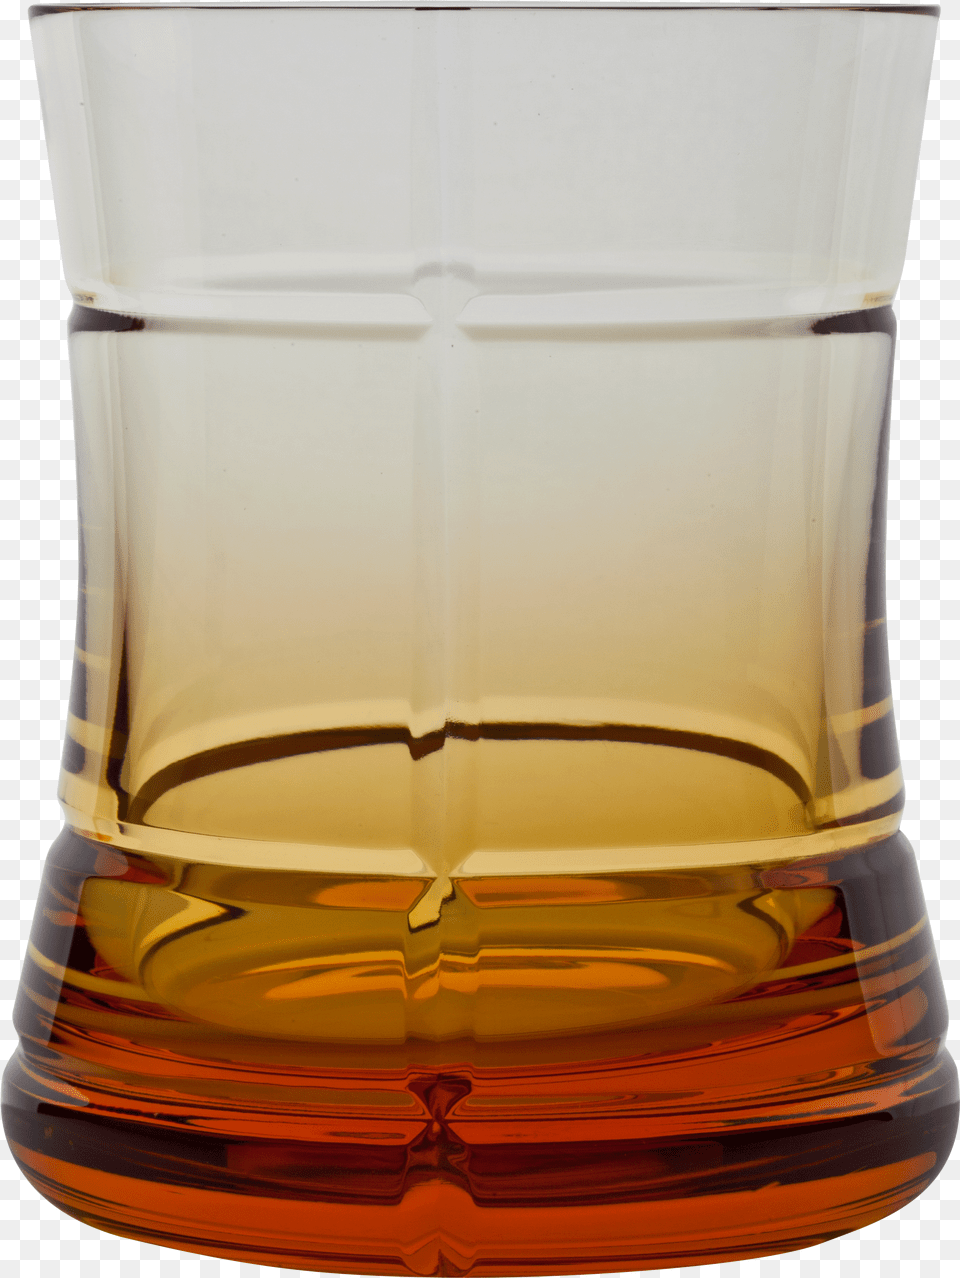 Cosmos Amber Water Glass Old Fashioned Glass, Alcohol, Beverage, Liquor, Beer Png Image